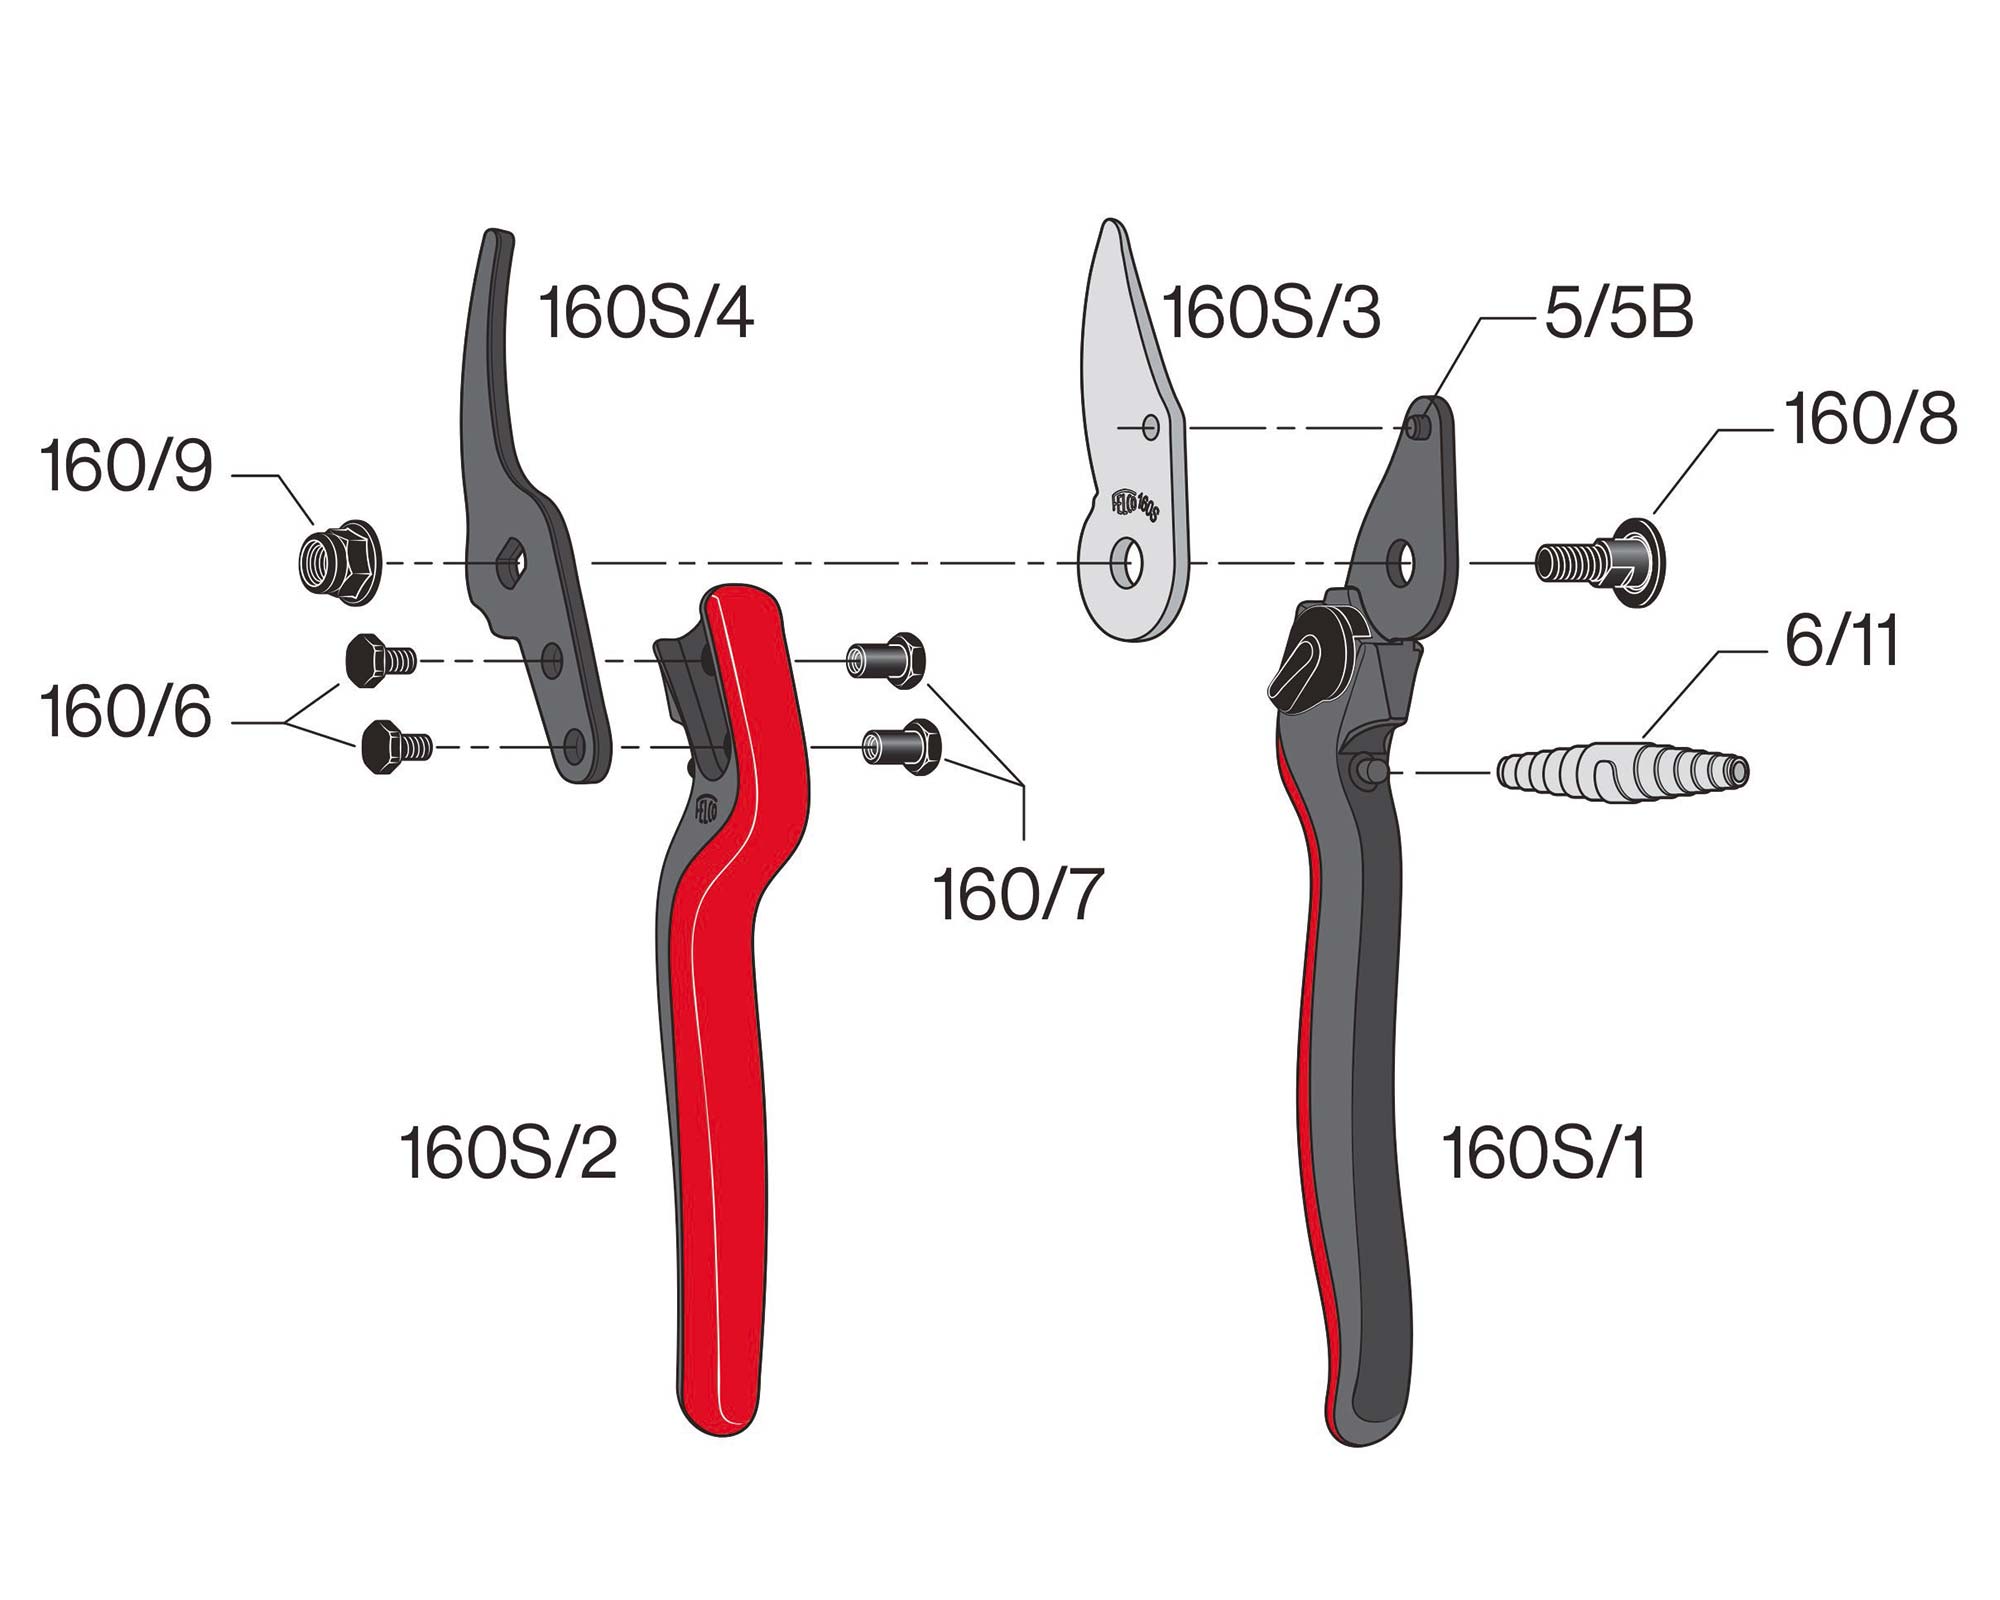 Felco160s Essentiel secateur exploded diagram showing the part in question here - being the 160s/3 spare blade